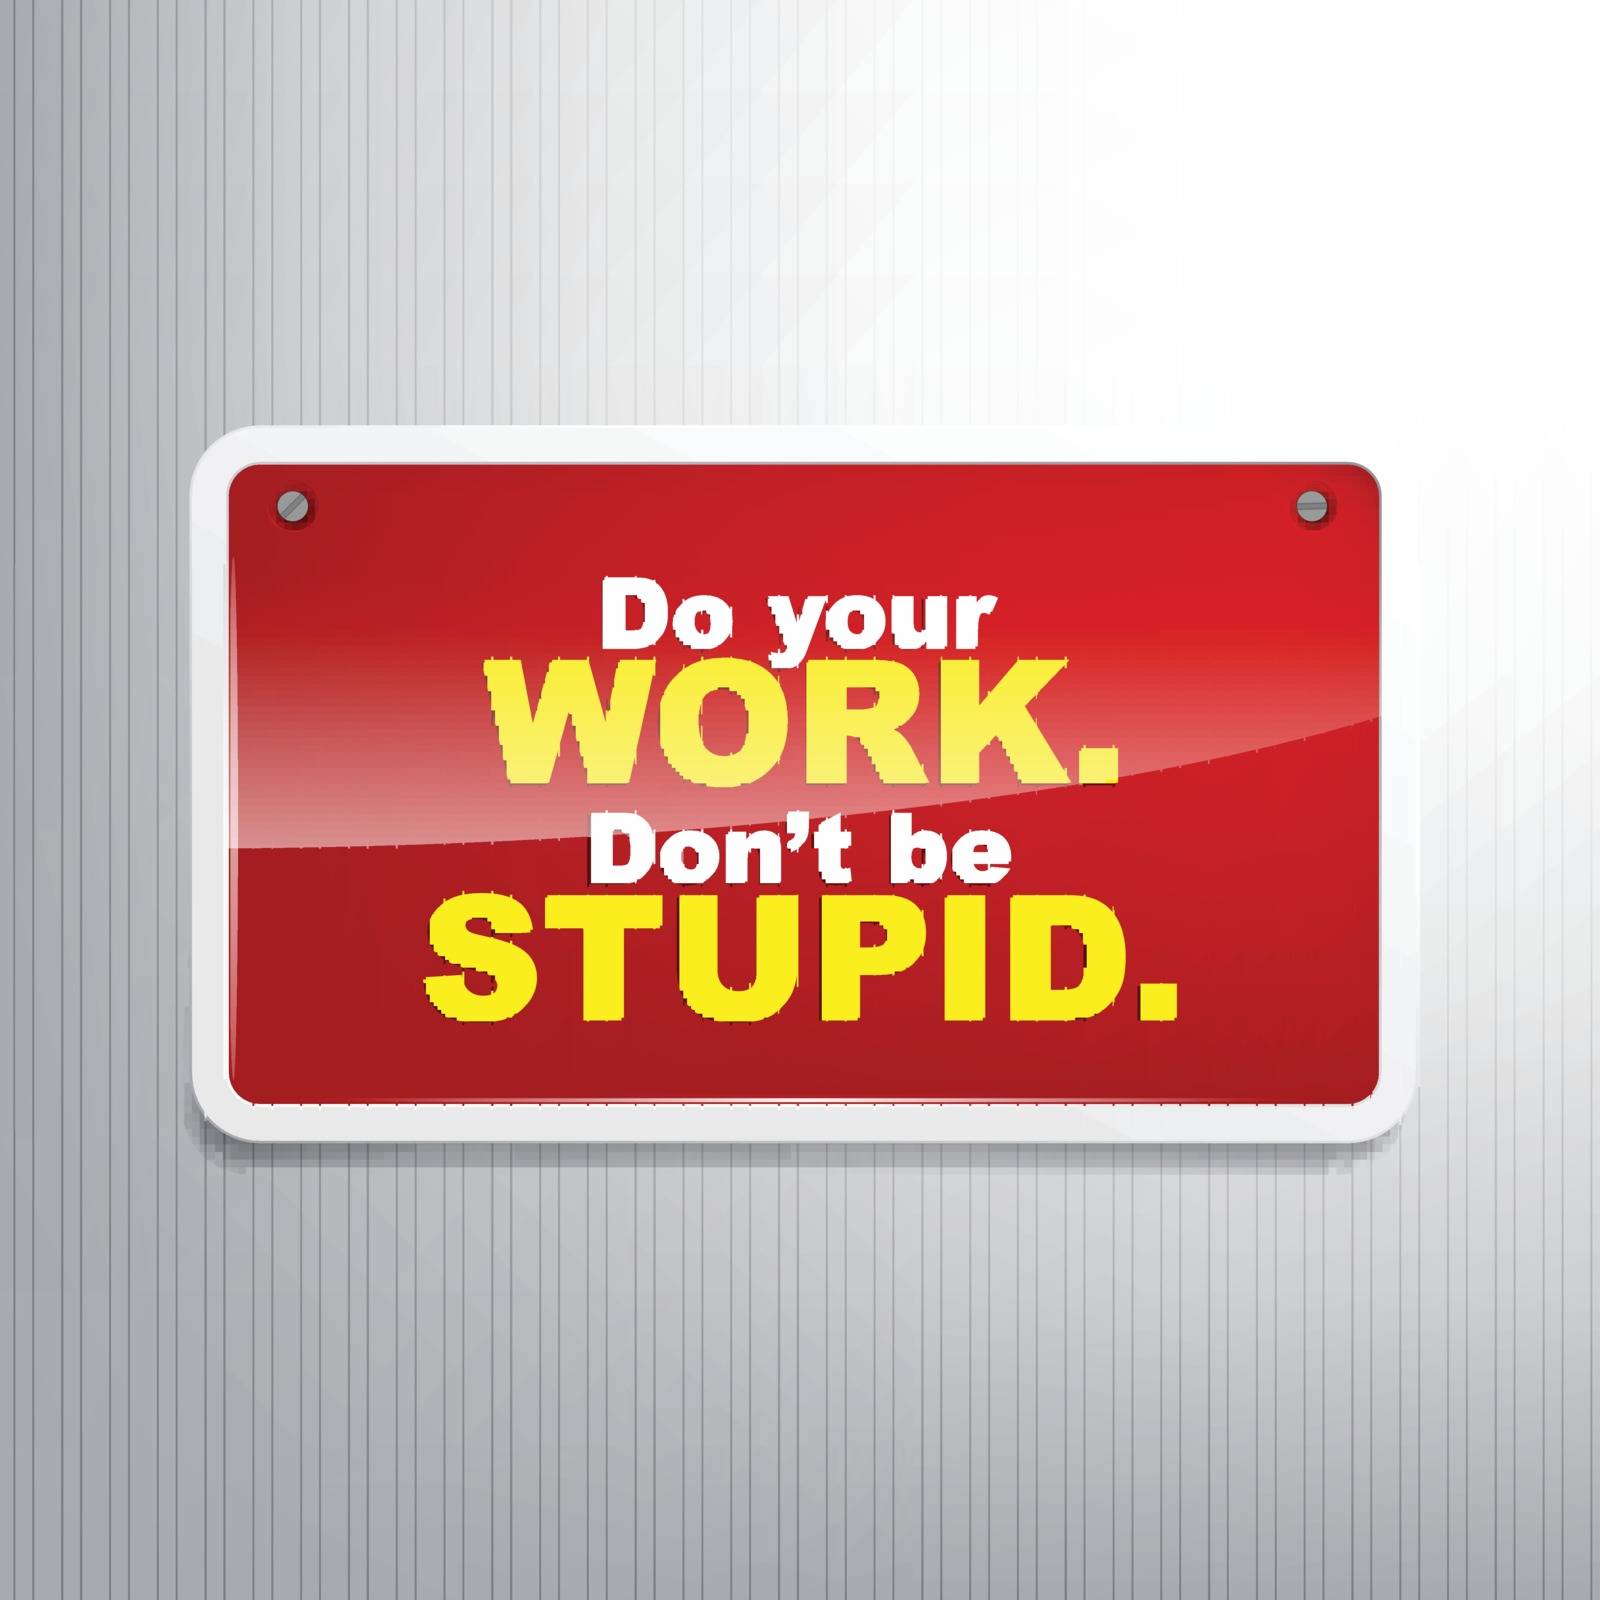 Do your work. Don't be stupid. Motivational background.